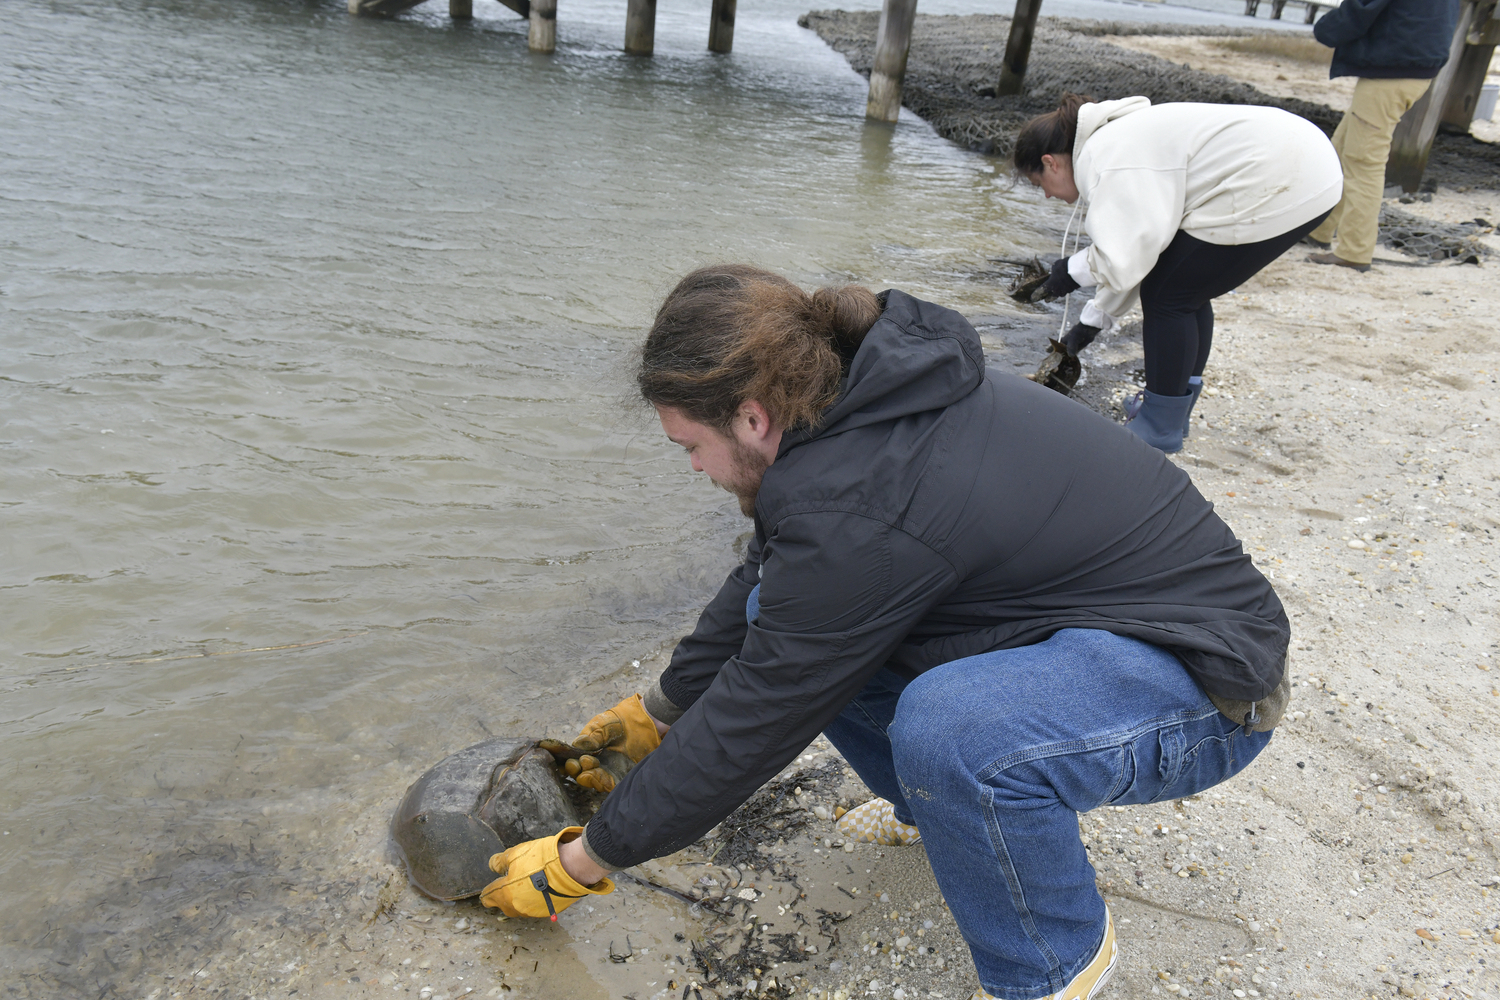 Thomas O'Connell releases a stranded horseshoe crab at the Tiana Bayside Facility on May 10.  DANA SHAW